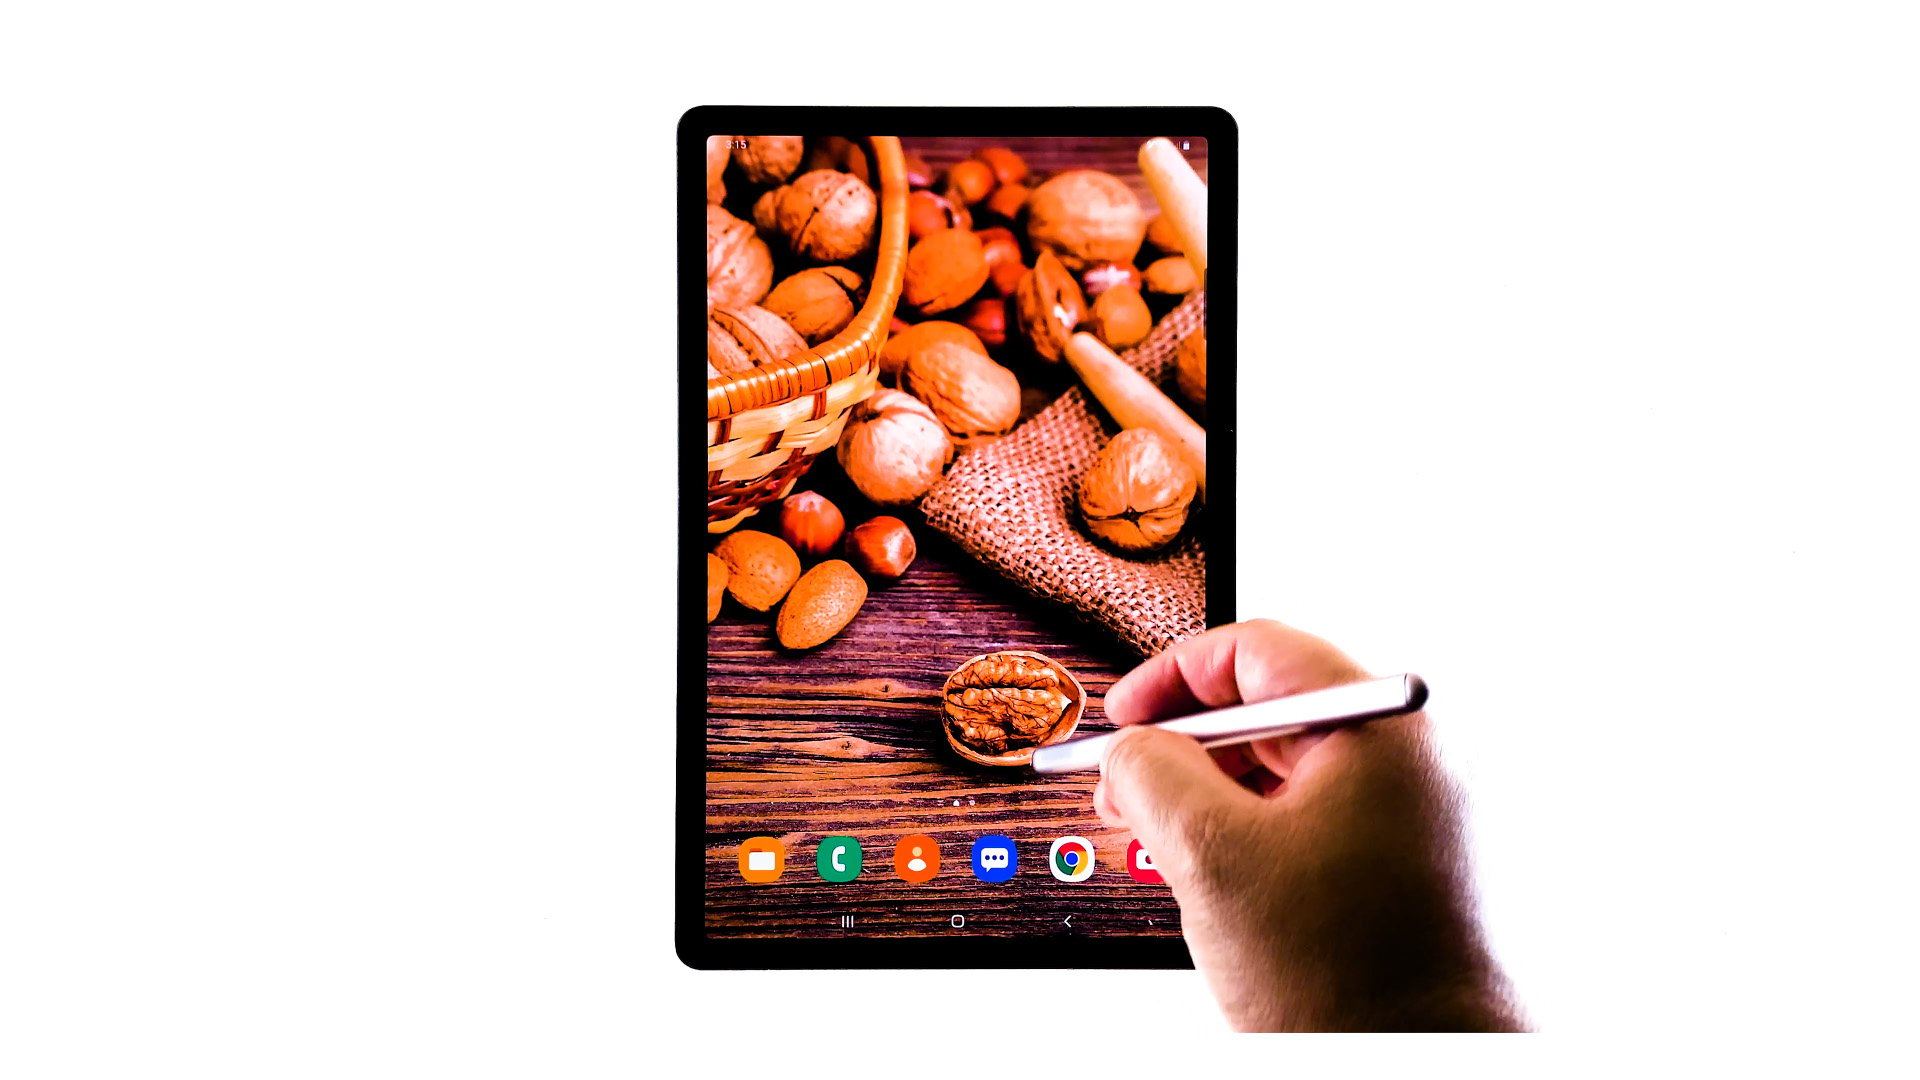 delete forget wifi network galaxy tab s6 - home screen